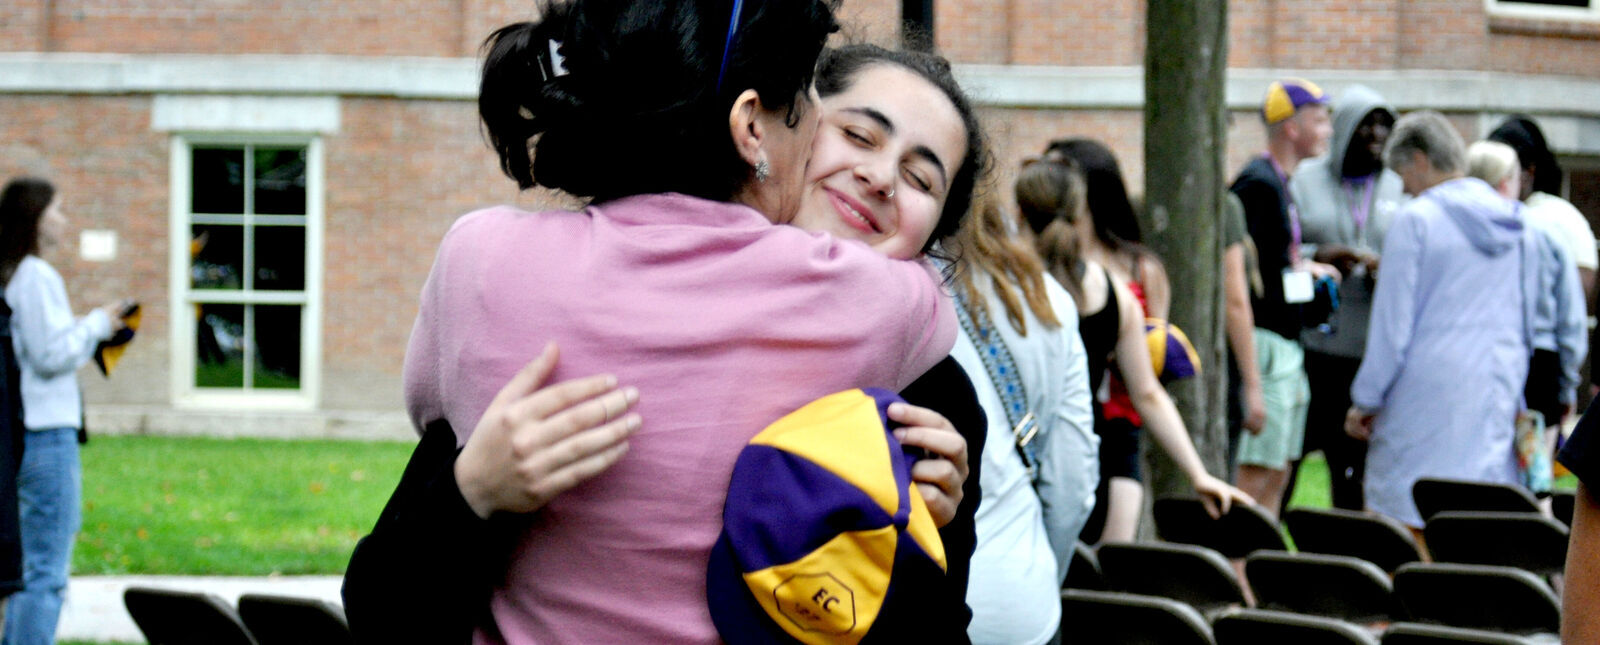 A mother and her daughter share a hug during the Fall Welcome